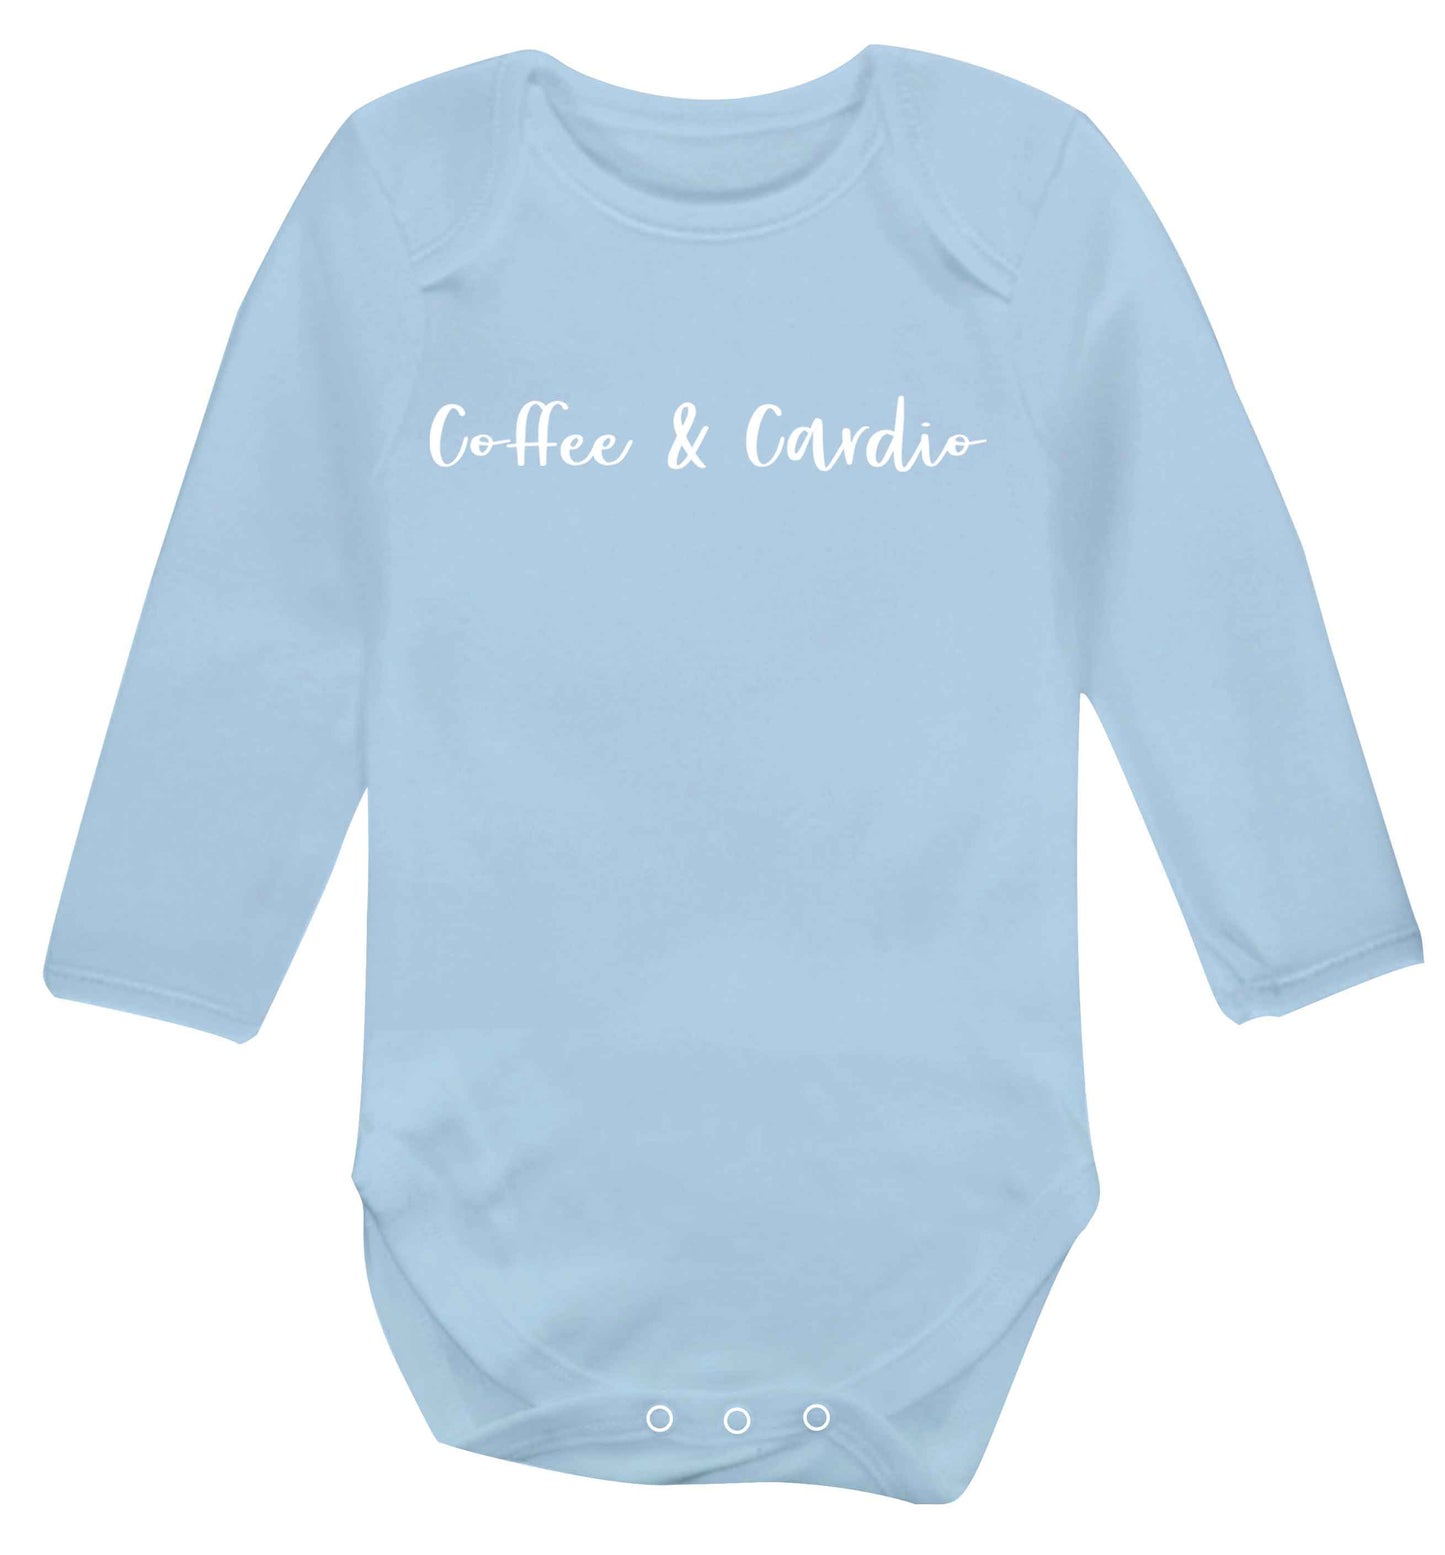 Coffee and cardio Baby Vest long sleeved pale blue 6-12 months